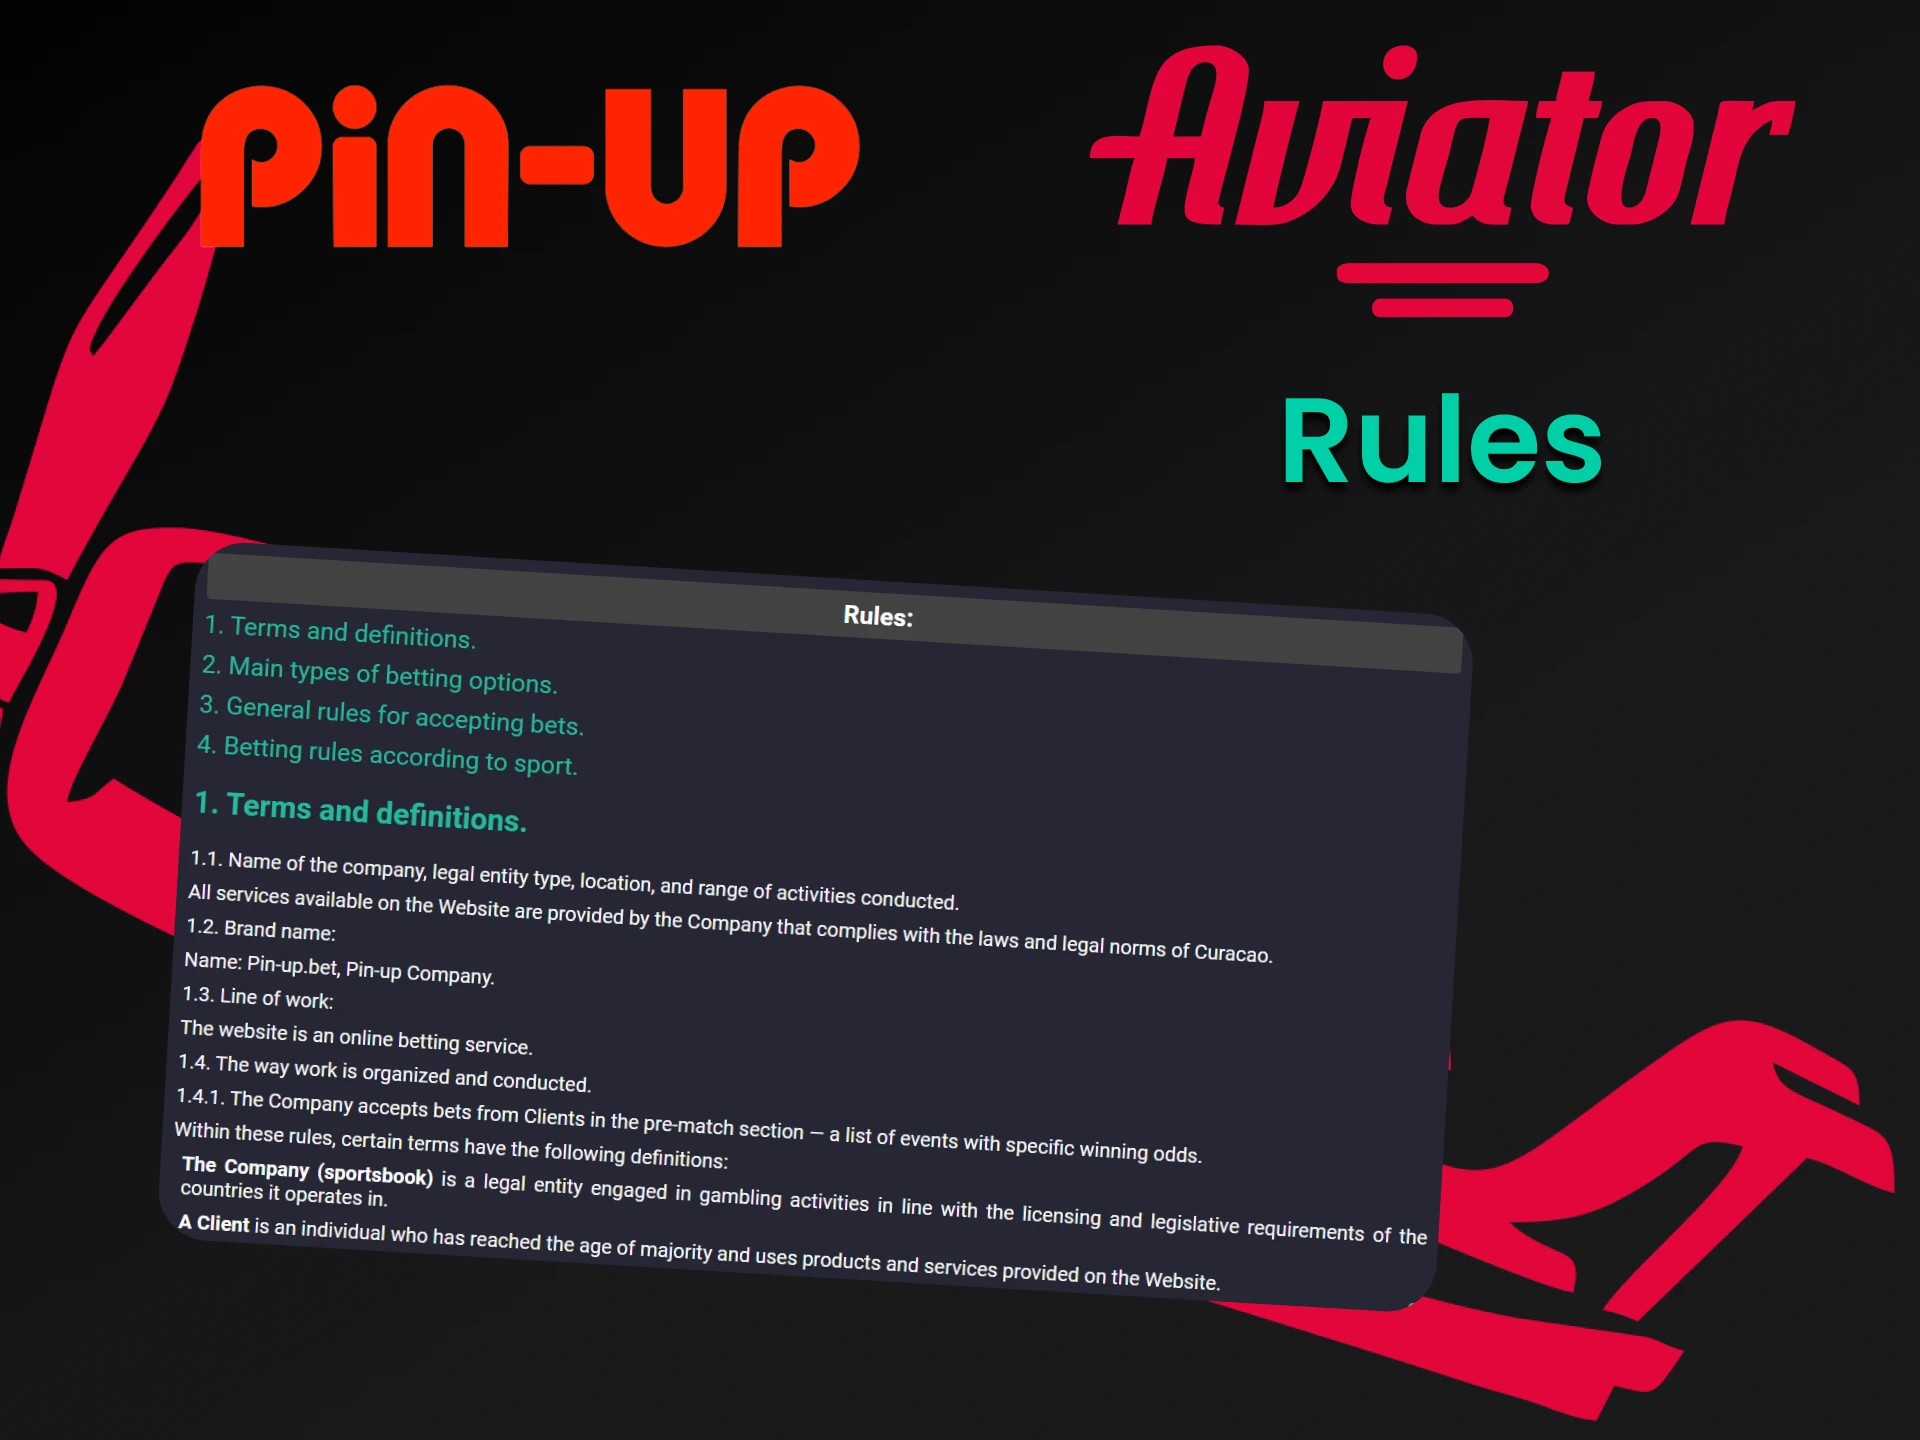 Learn the rules for using the Pin Up service.